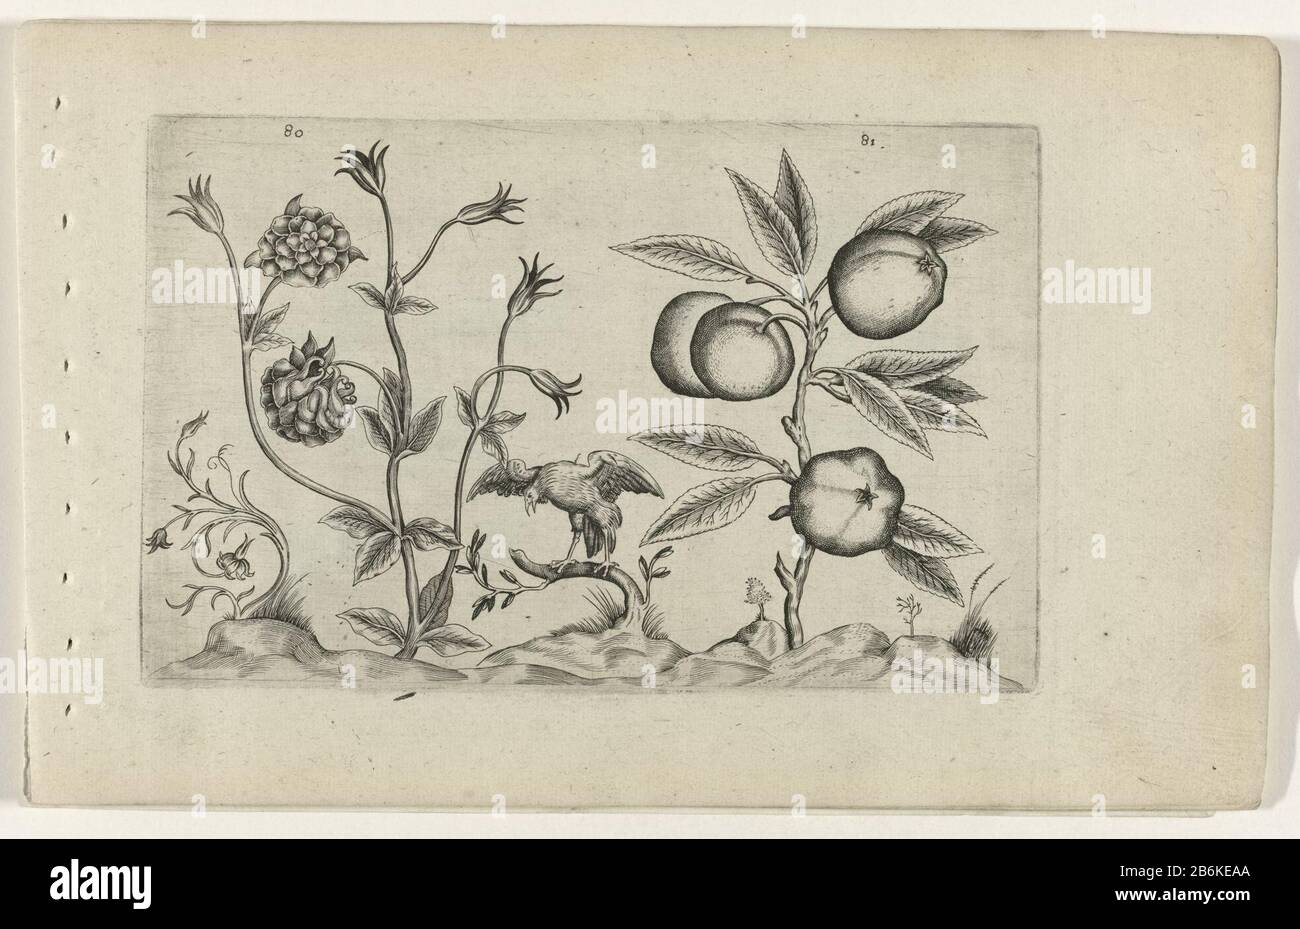 Dubbelt Akelei en appel know lilies (serietitel) Double columbine (Aquilegia vulgaris), and apple (Malus pumila Miller), numbered 80 and 81. in between a roofvogel. Manufacturer : print maker: Crispijn of de Passe (I) (attributed to) to drawing of: Crispijn of the Passe (I) (attributed to) publisher: Crispijn of de Passe (I), editor: Hans Wout Neel Place manufacture: print maker: Cologne in drawing: Cologne Publisher: Cologne Publisher: London Date: 1600 - 1604 Physical characteristics: engra; proofing material: paper Technique: engra (printing process) Measurements: plate edge: H 127 mm × W 2 Stock Photo